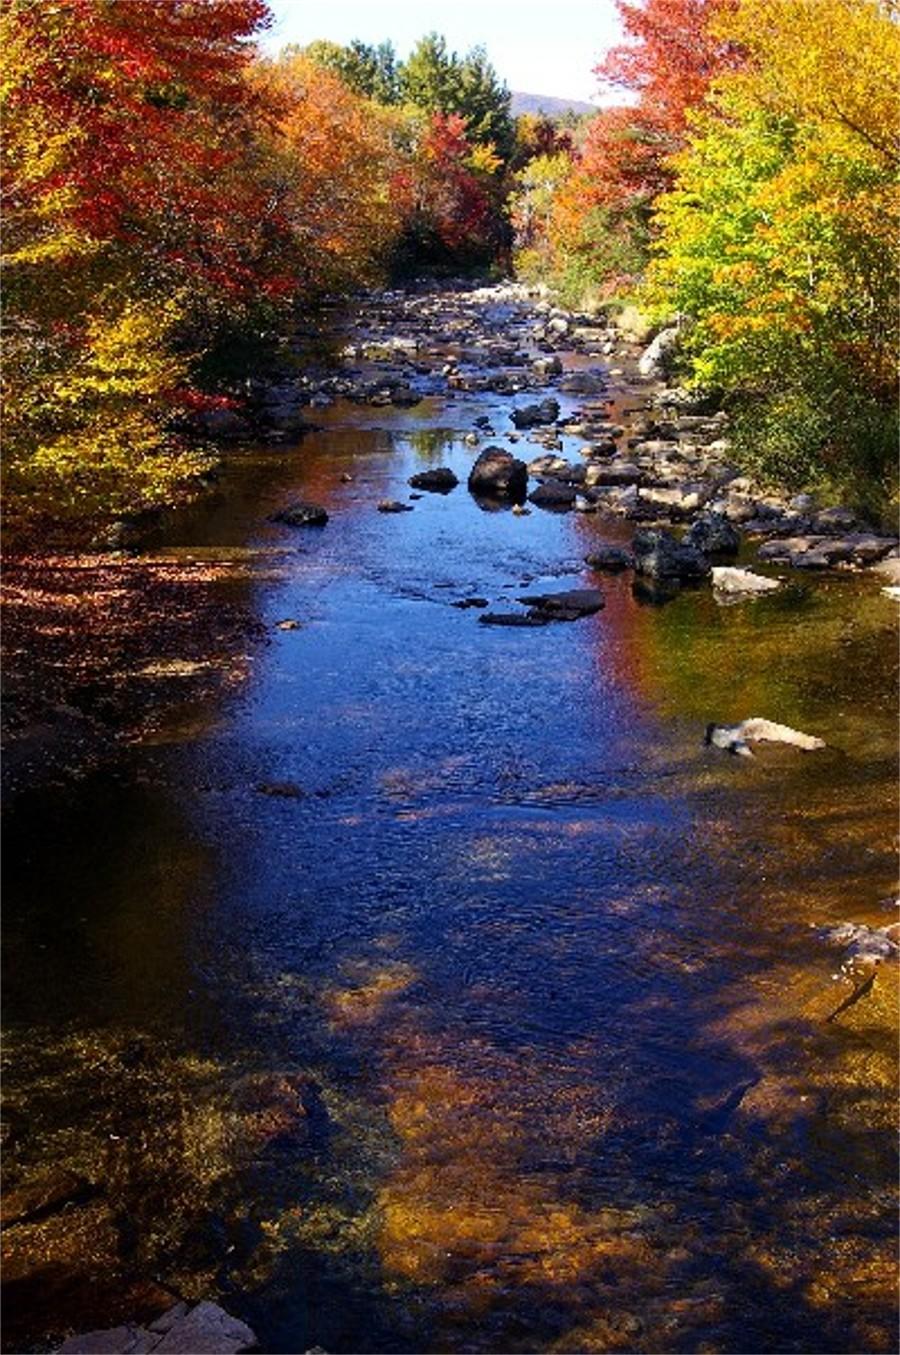 Wild Ammonoosus River in the Fall (user submitted)